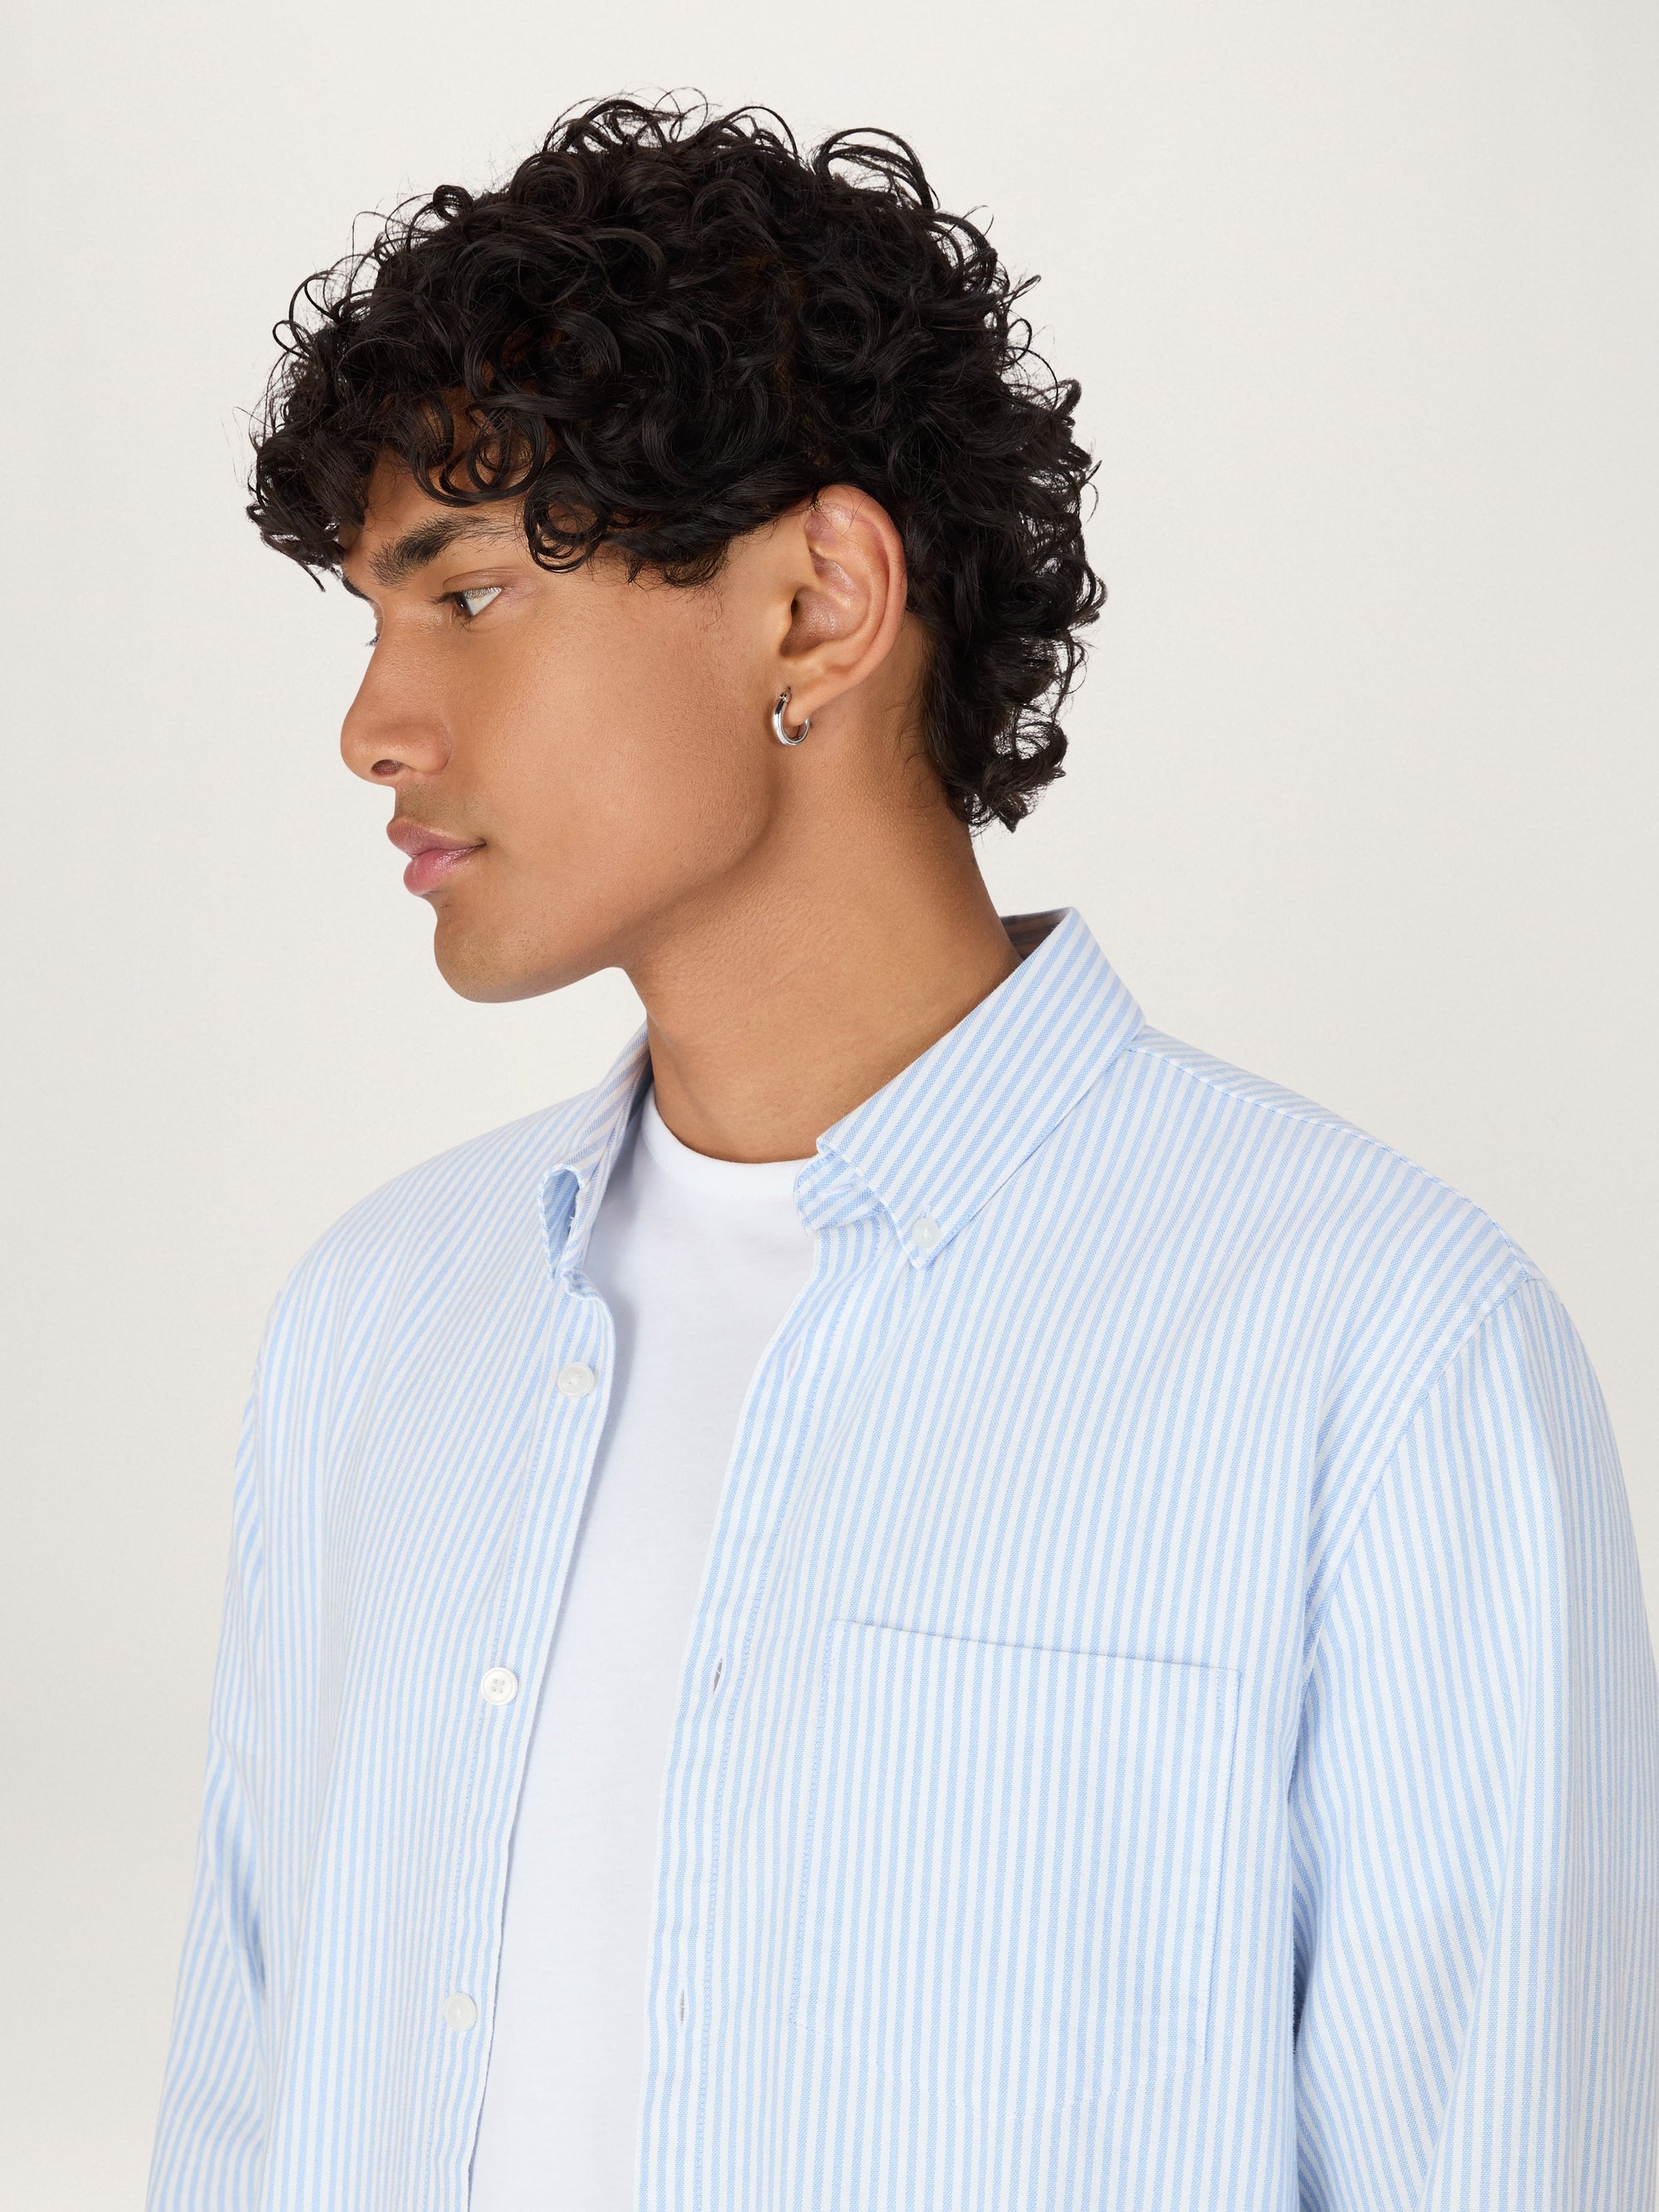 The All Day Oxford Shirt || Blue Stripe | Stretch Cotton